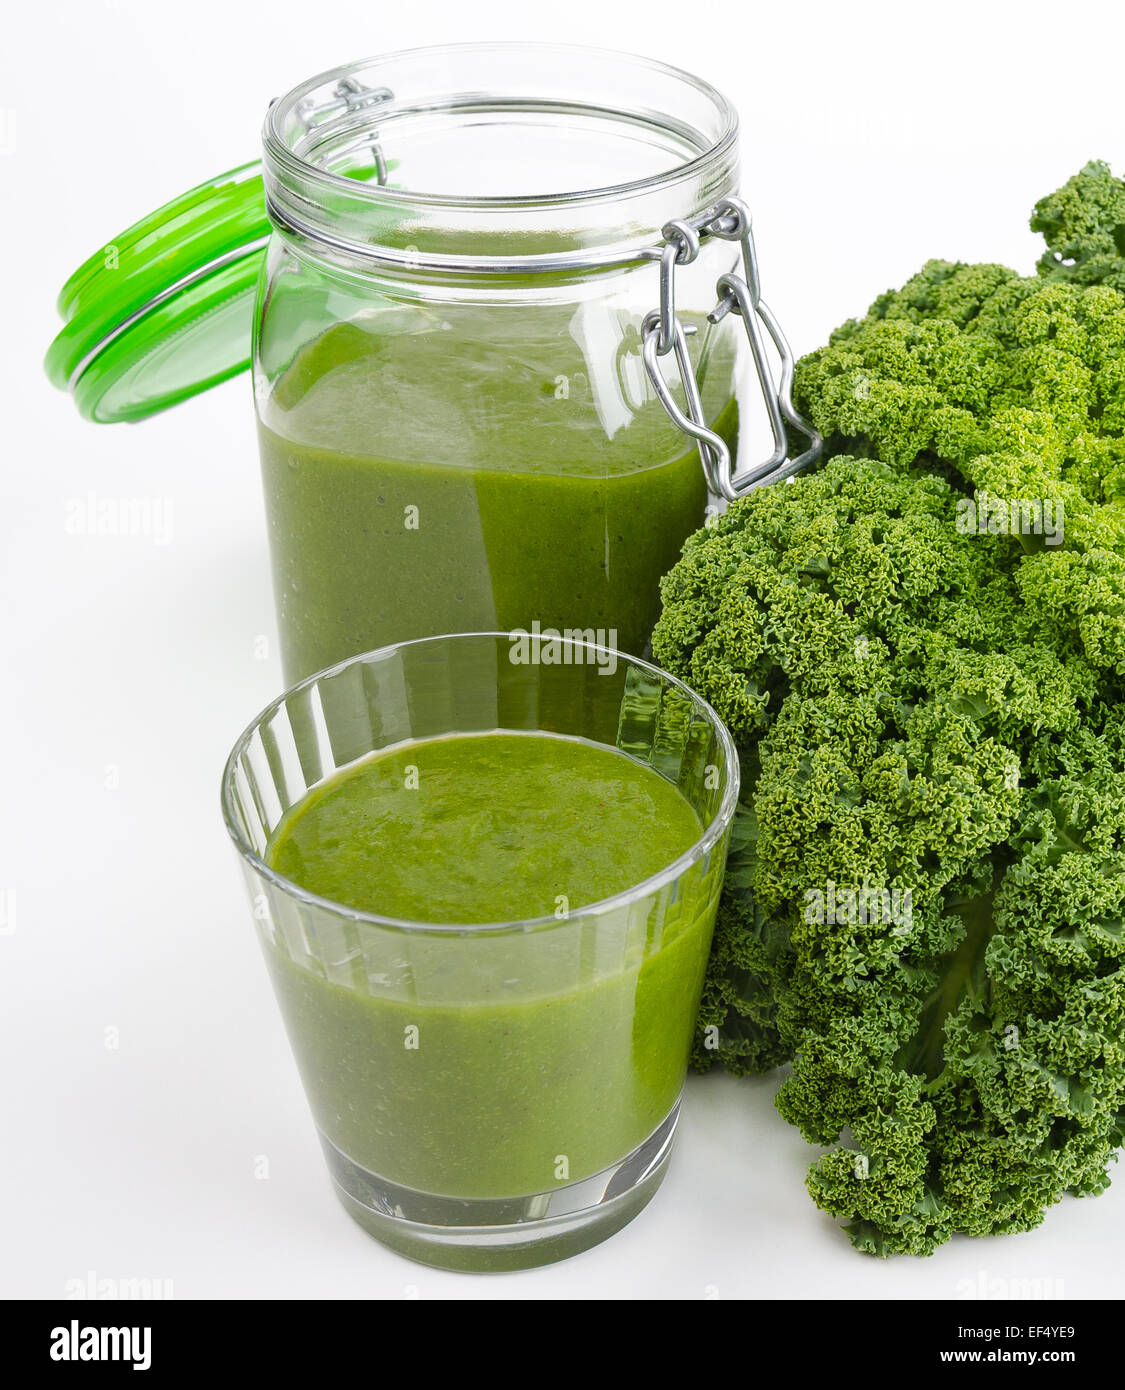 Green smoothie in a glass and in a open jar with fresh kale. A raw, healthy and vegan beverage made of green leafs and fruits. Stock Photo